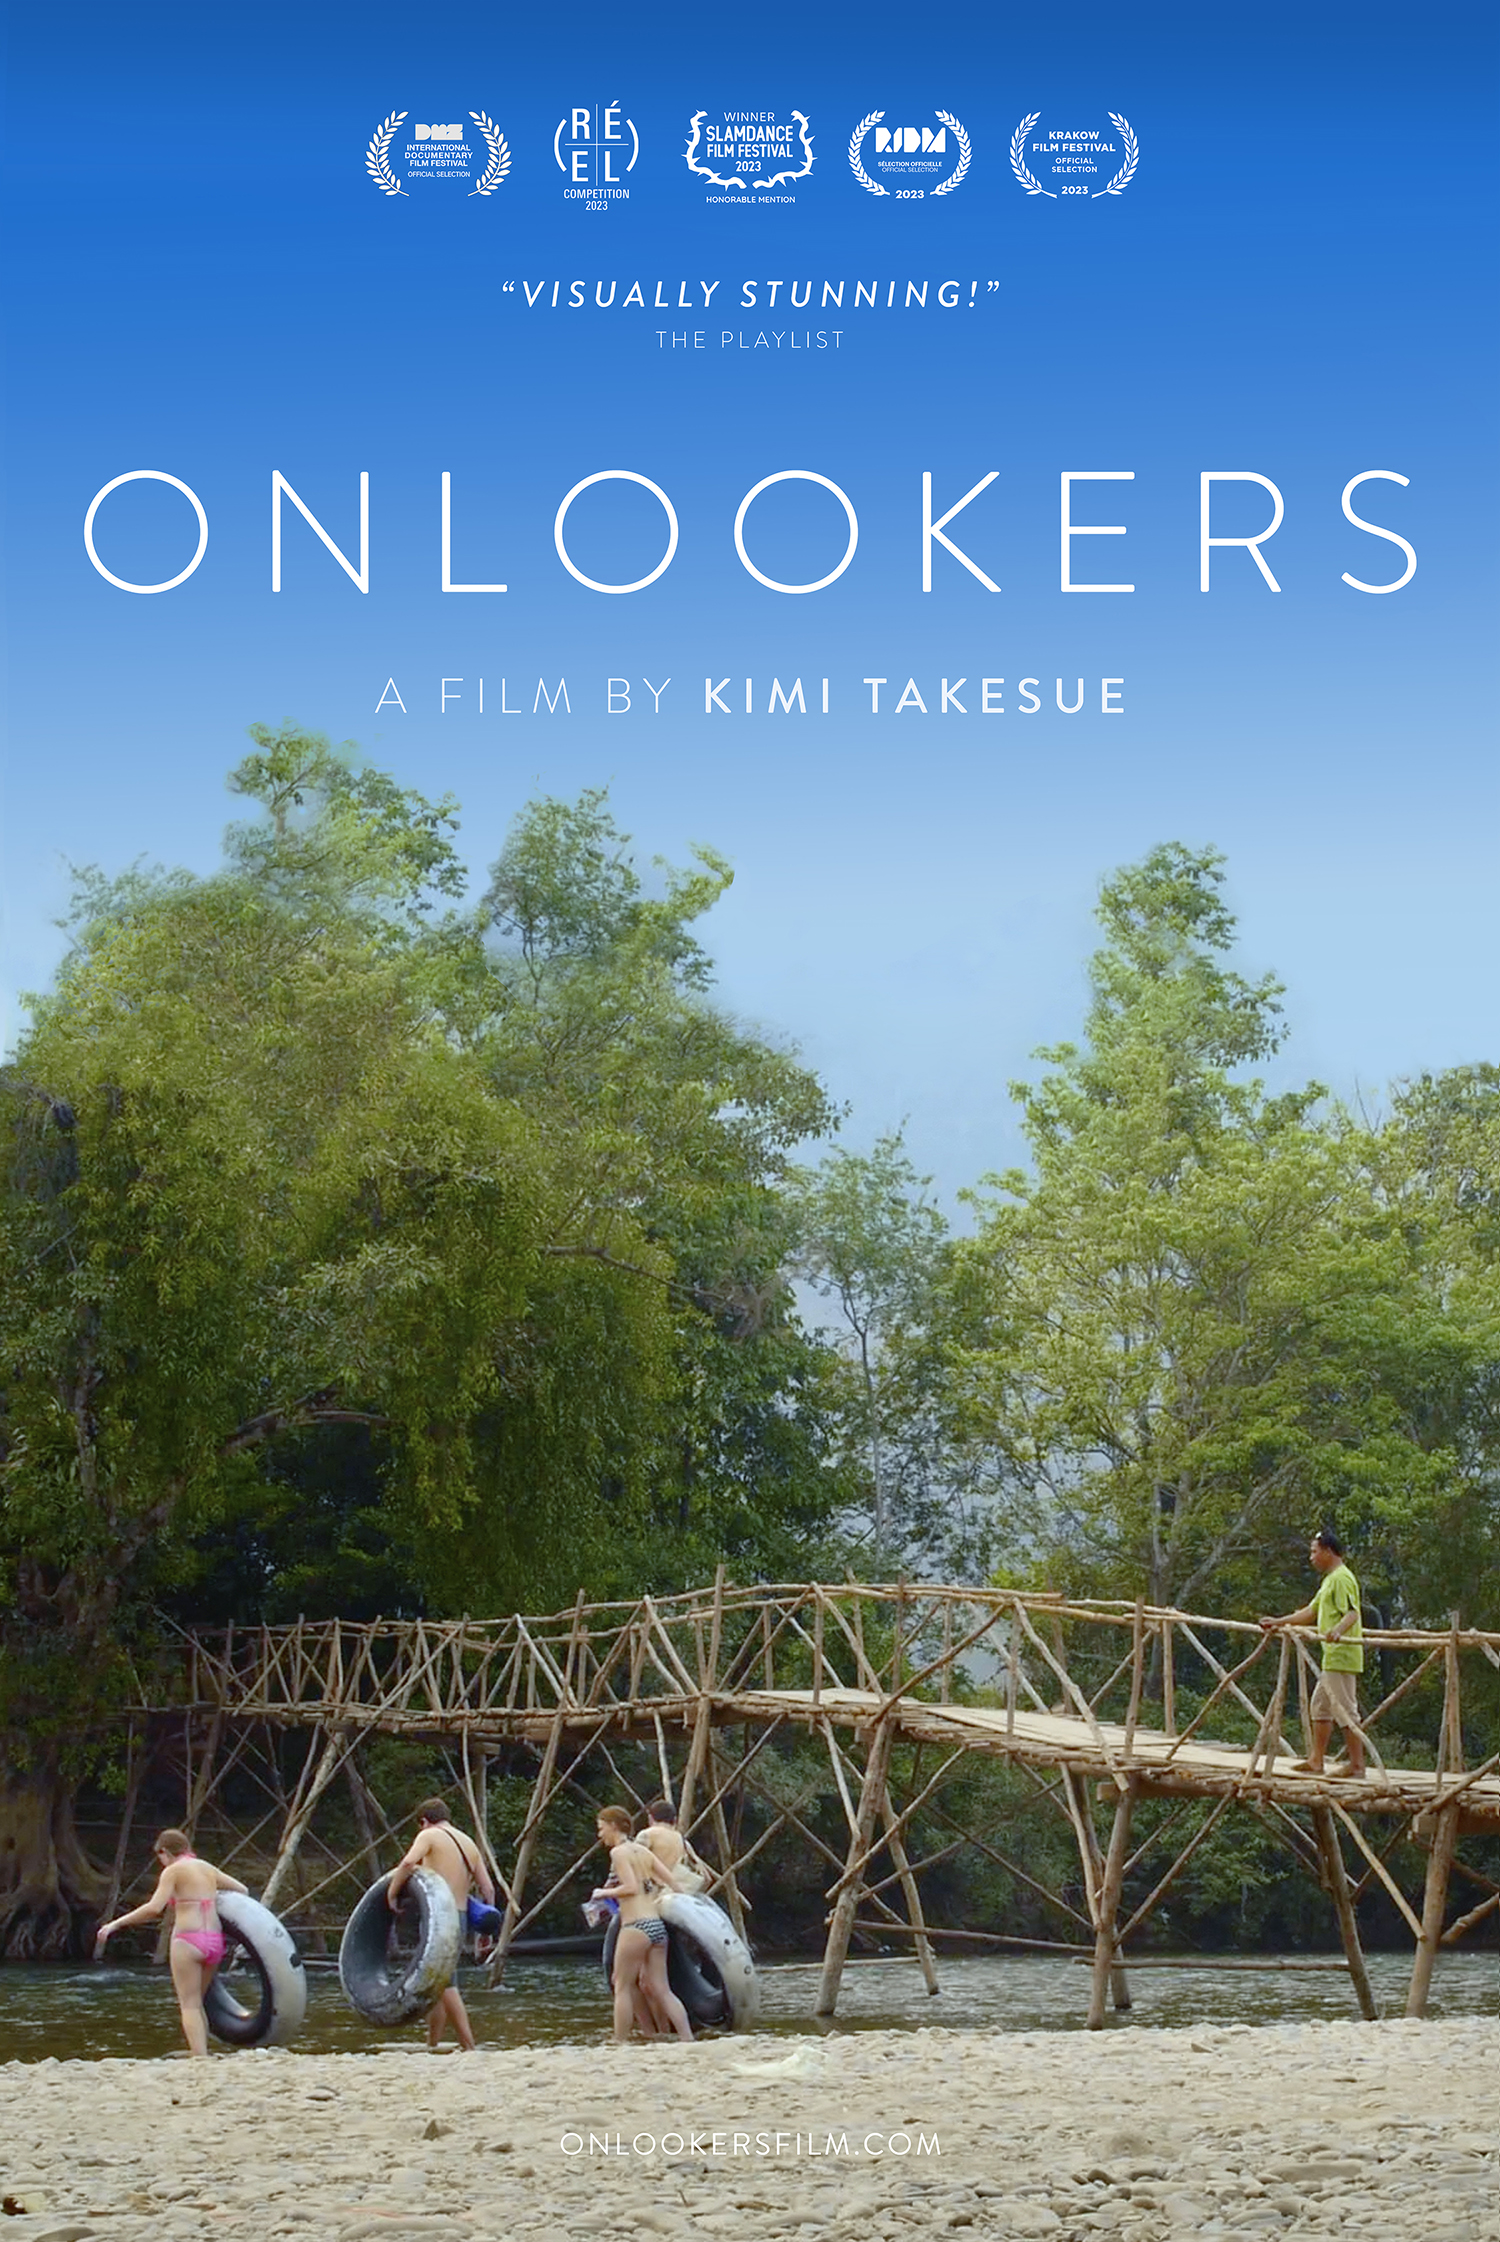 Onlookers Theatrical Poster